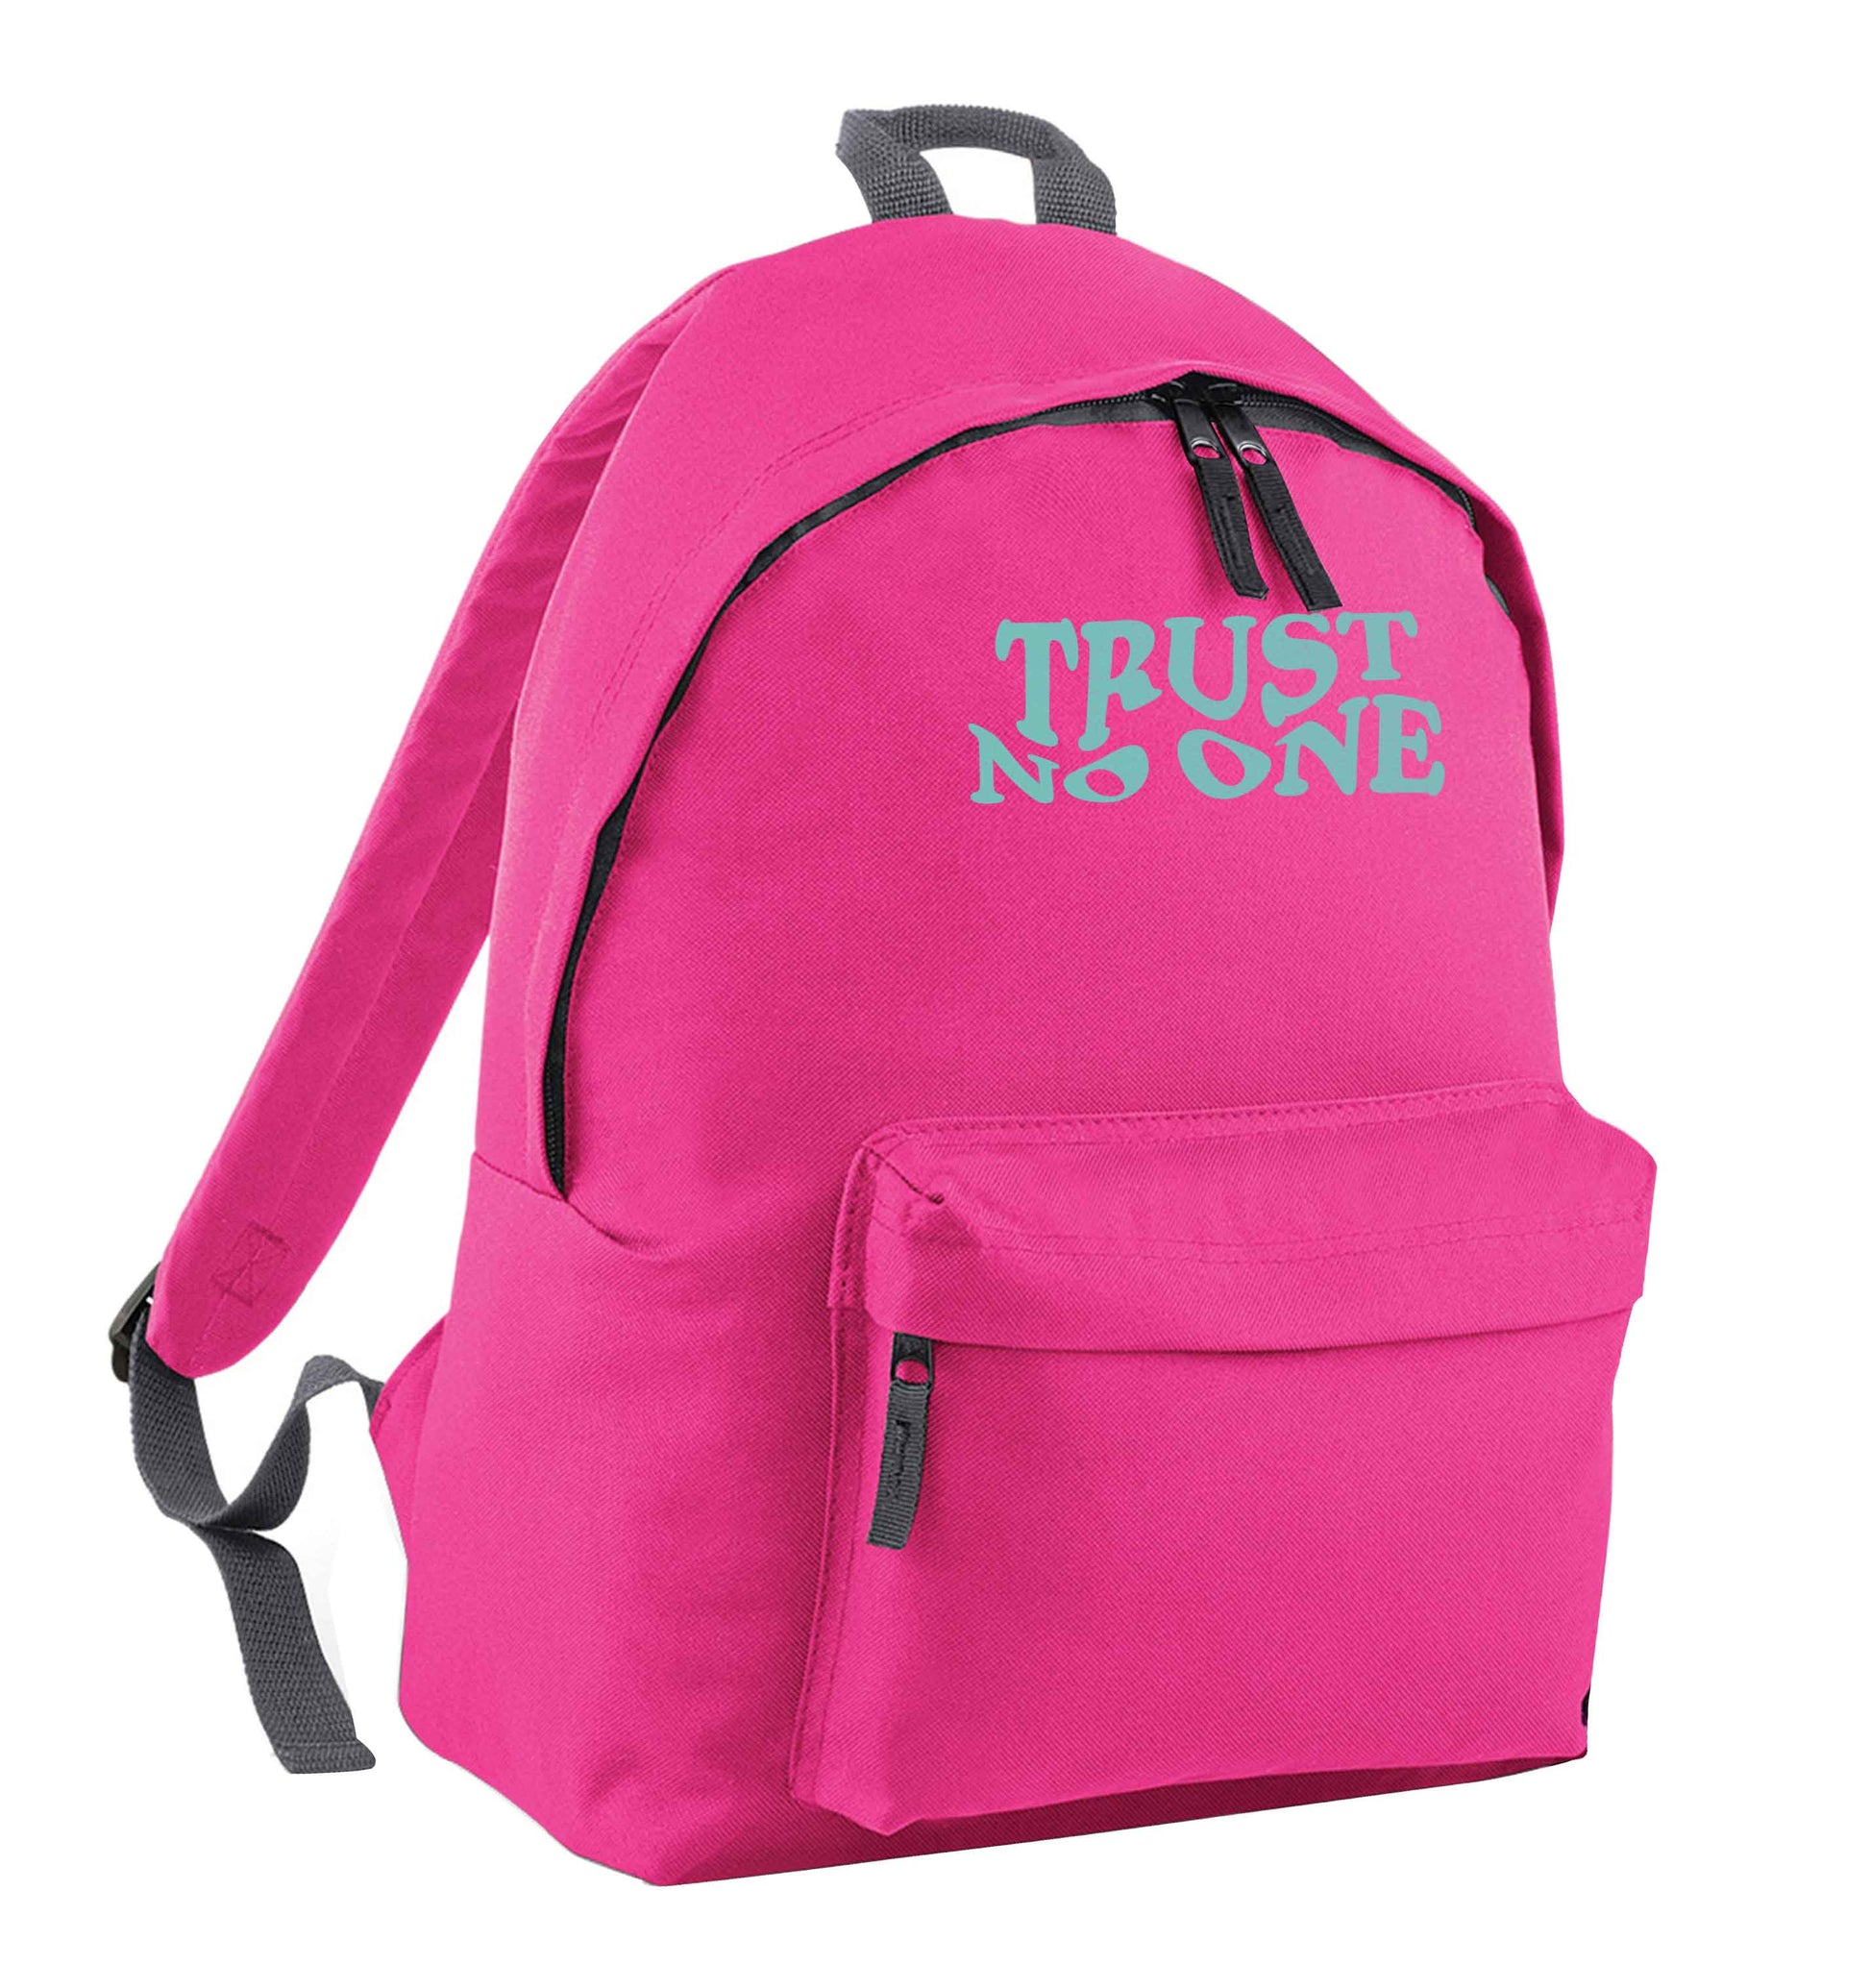 Trust no one pink children's backpack